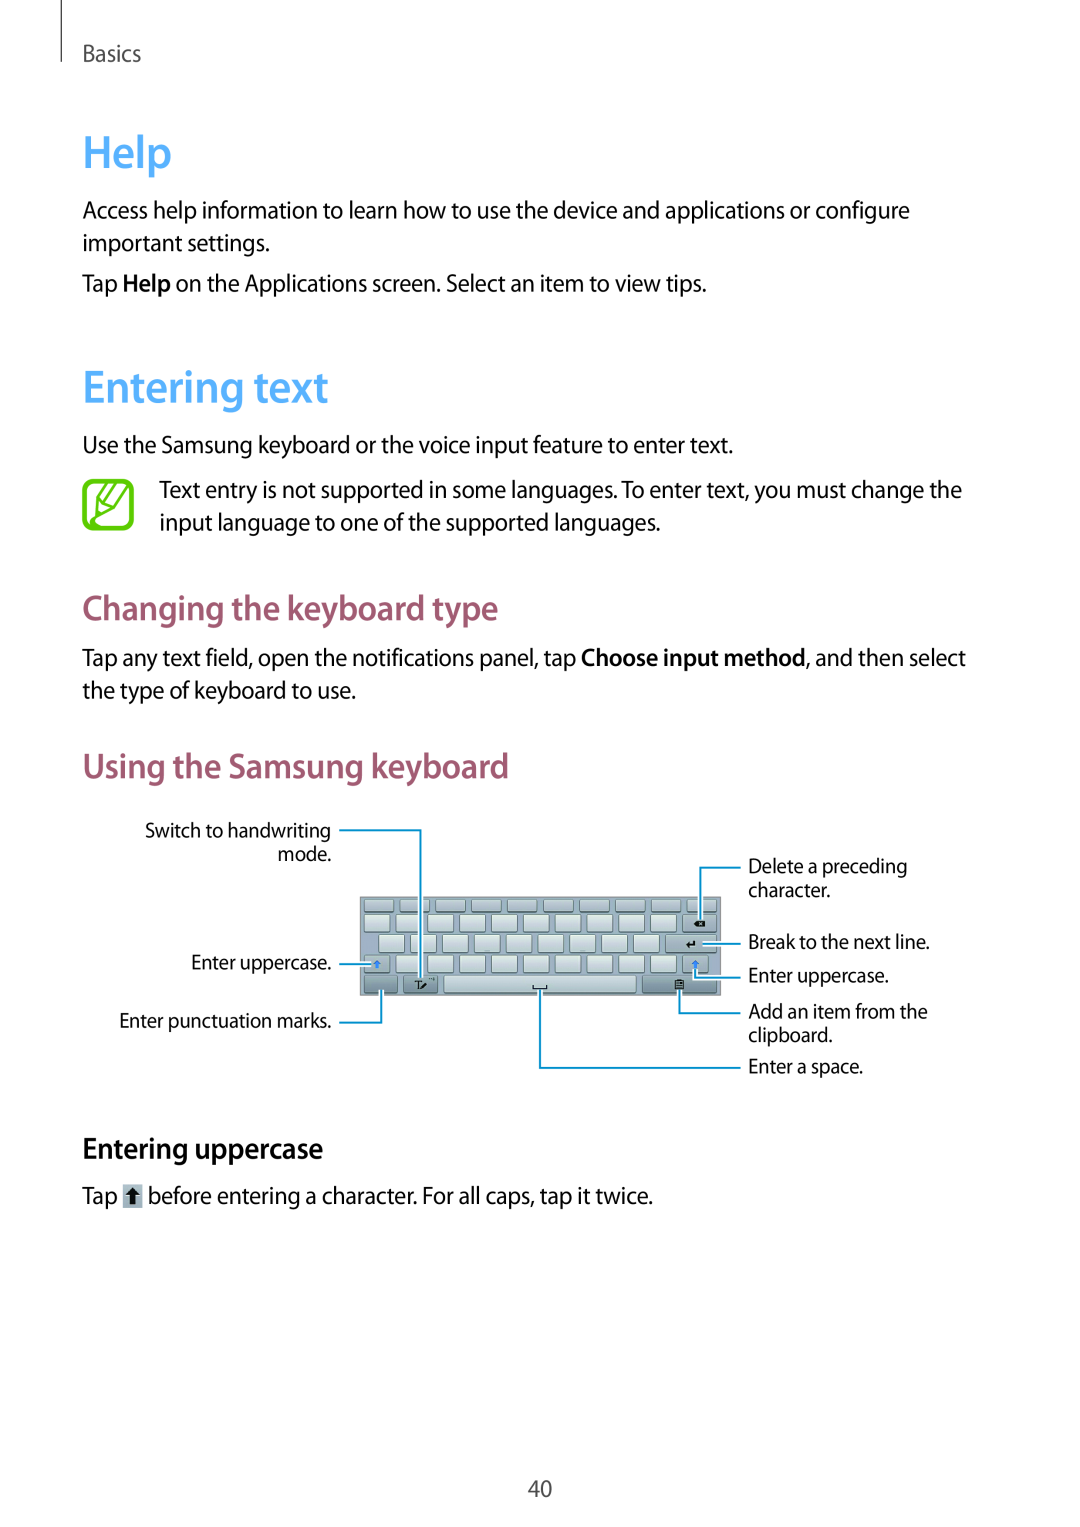 Samsung GT-N8000ZWABGL Help, Entering text, Changing the keyboard type, Entering uppercase, Using the Samsung keyboard 